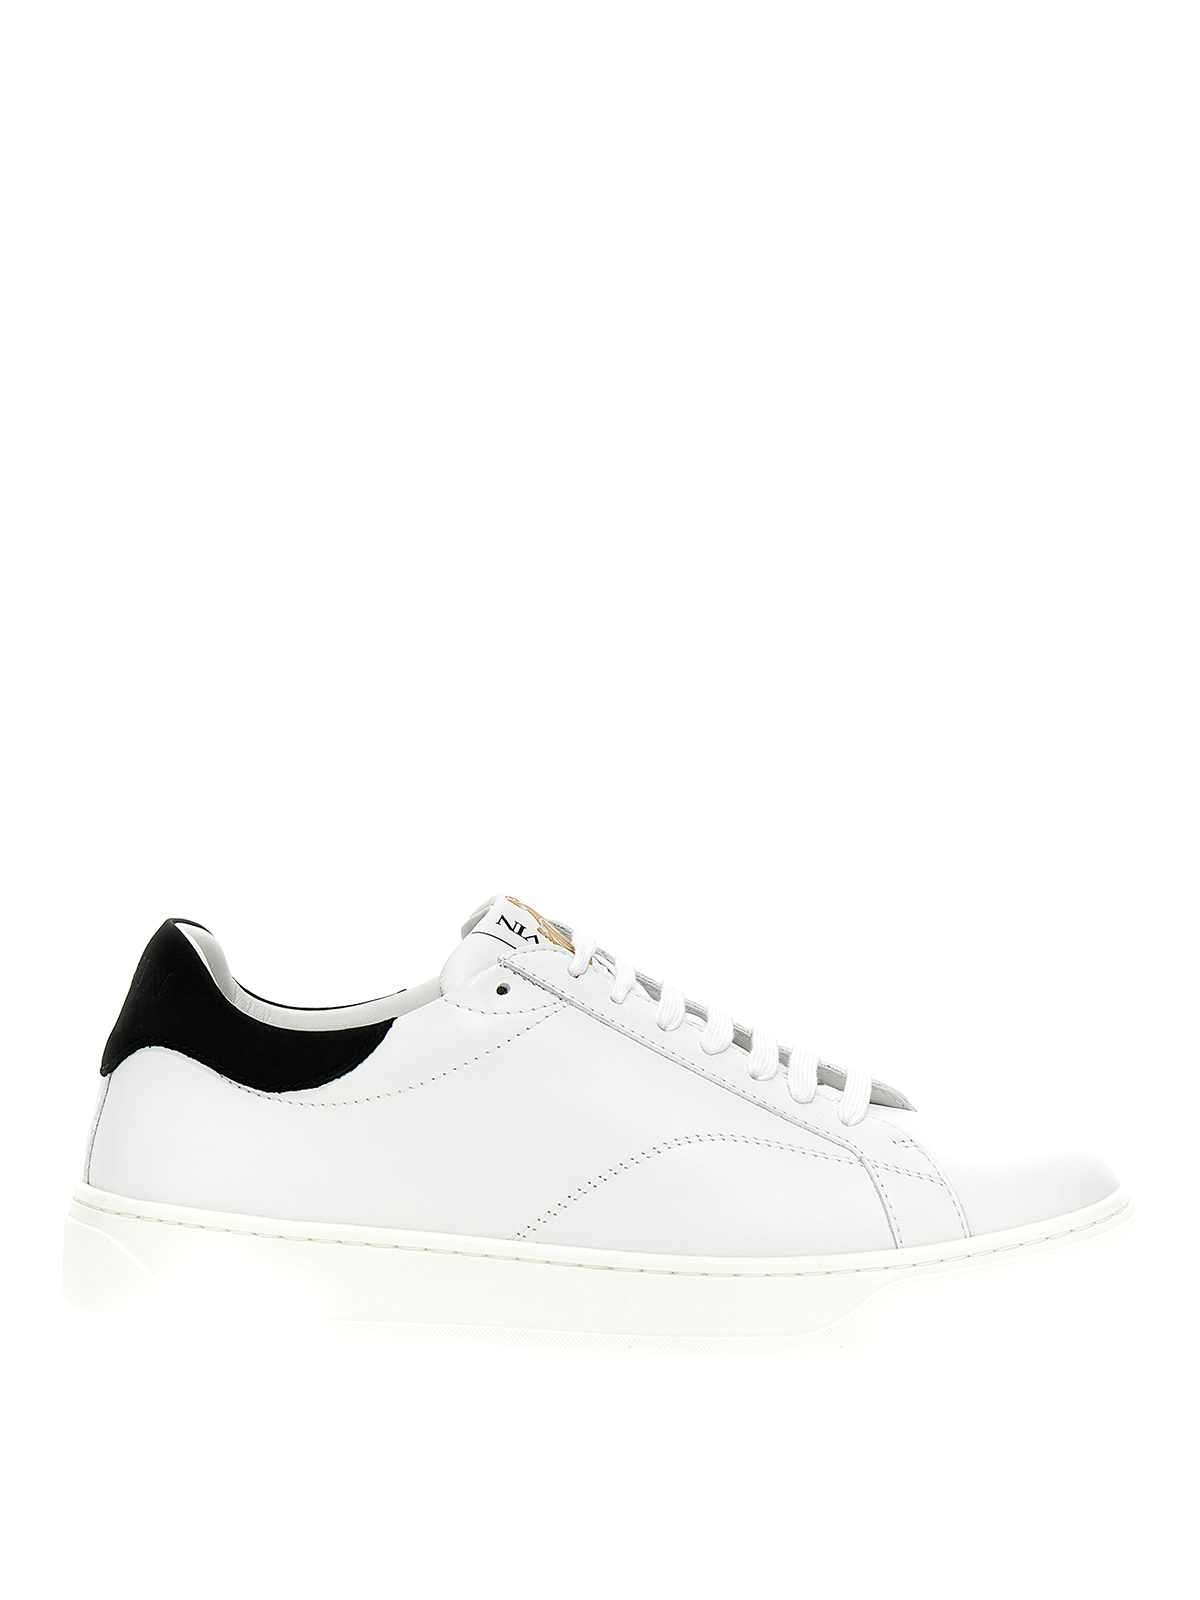 Lanvin Leather Sneakers With Contrast Heel In Blanco